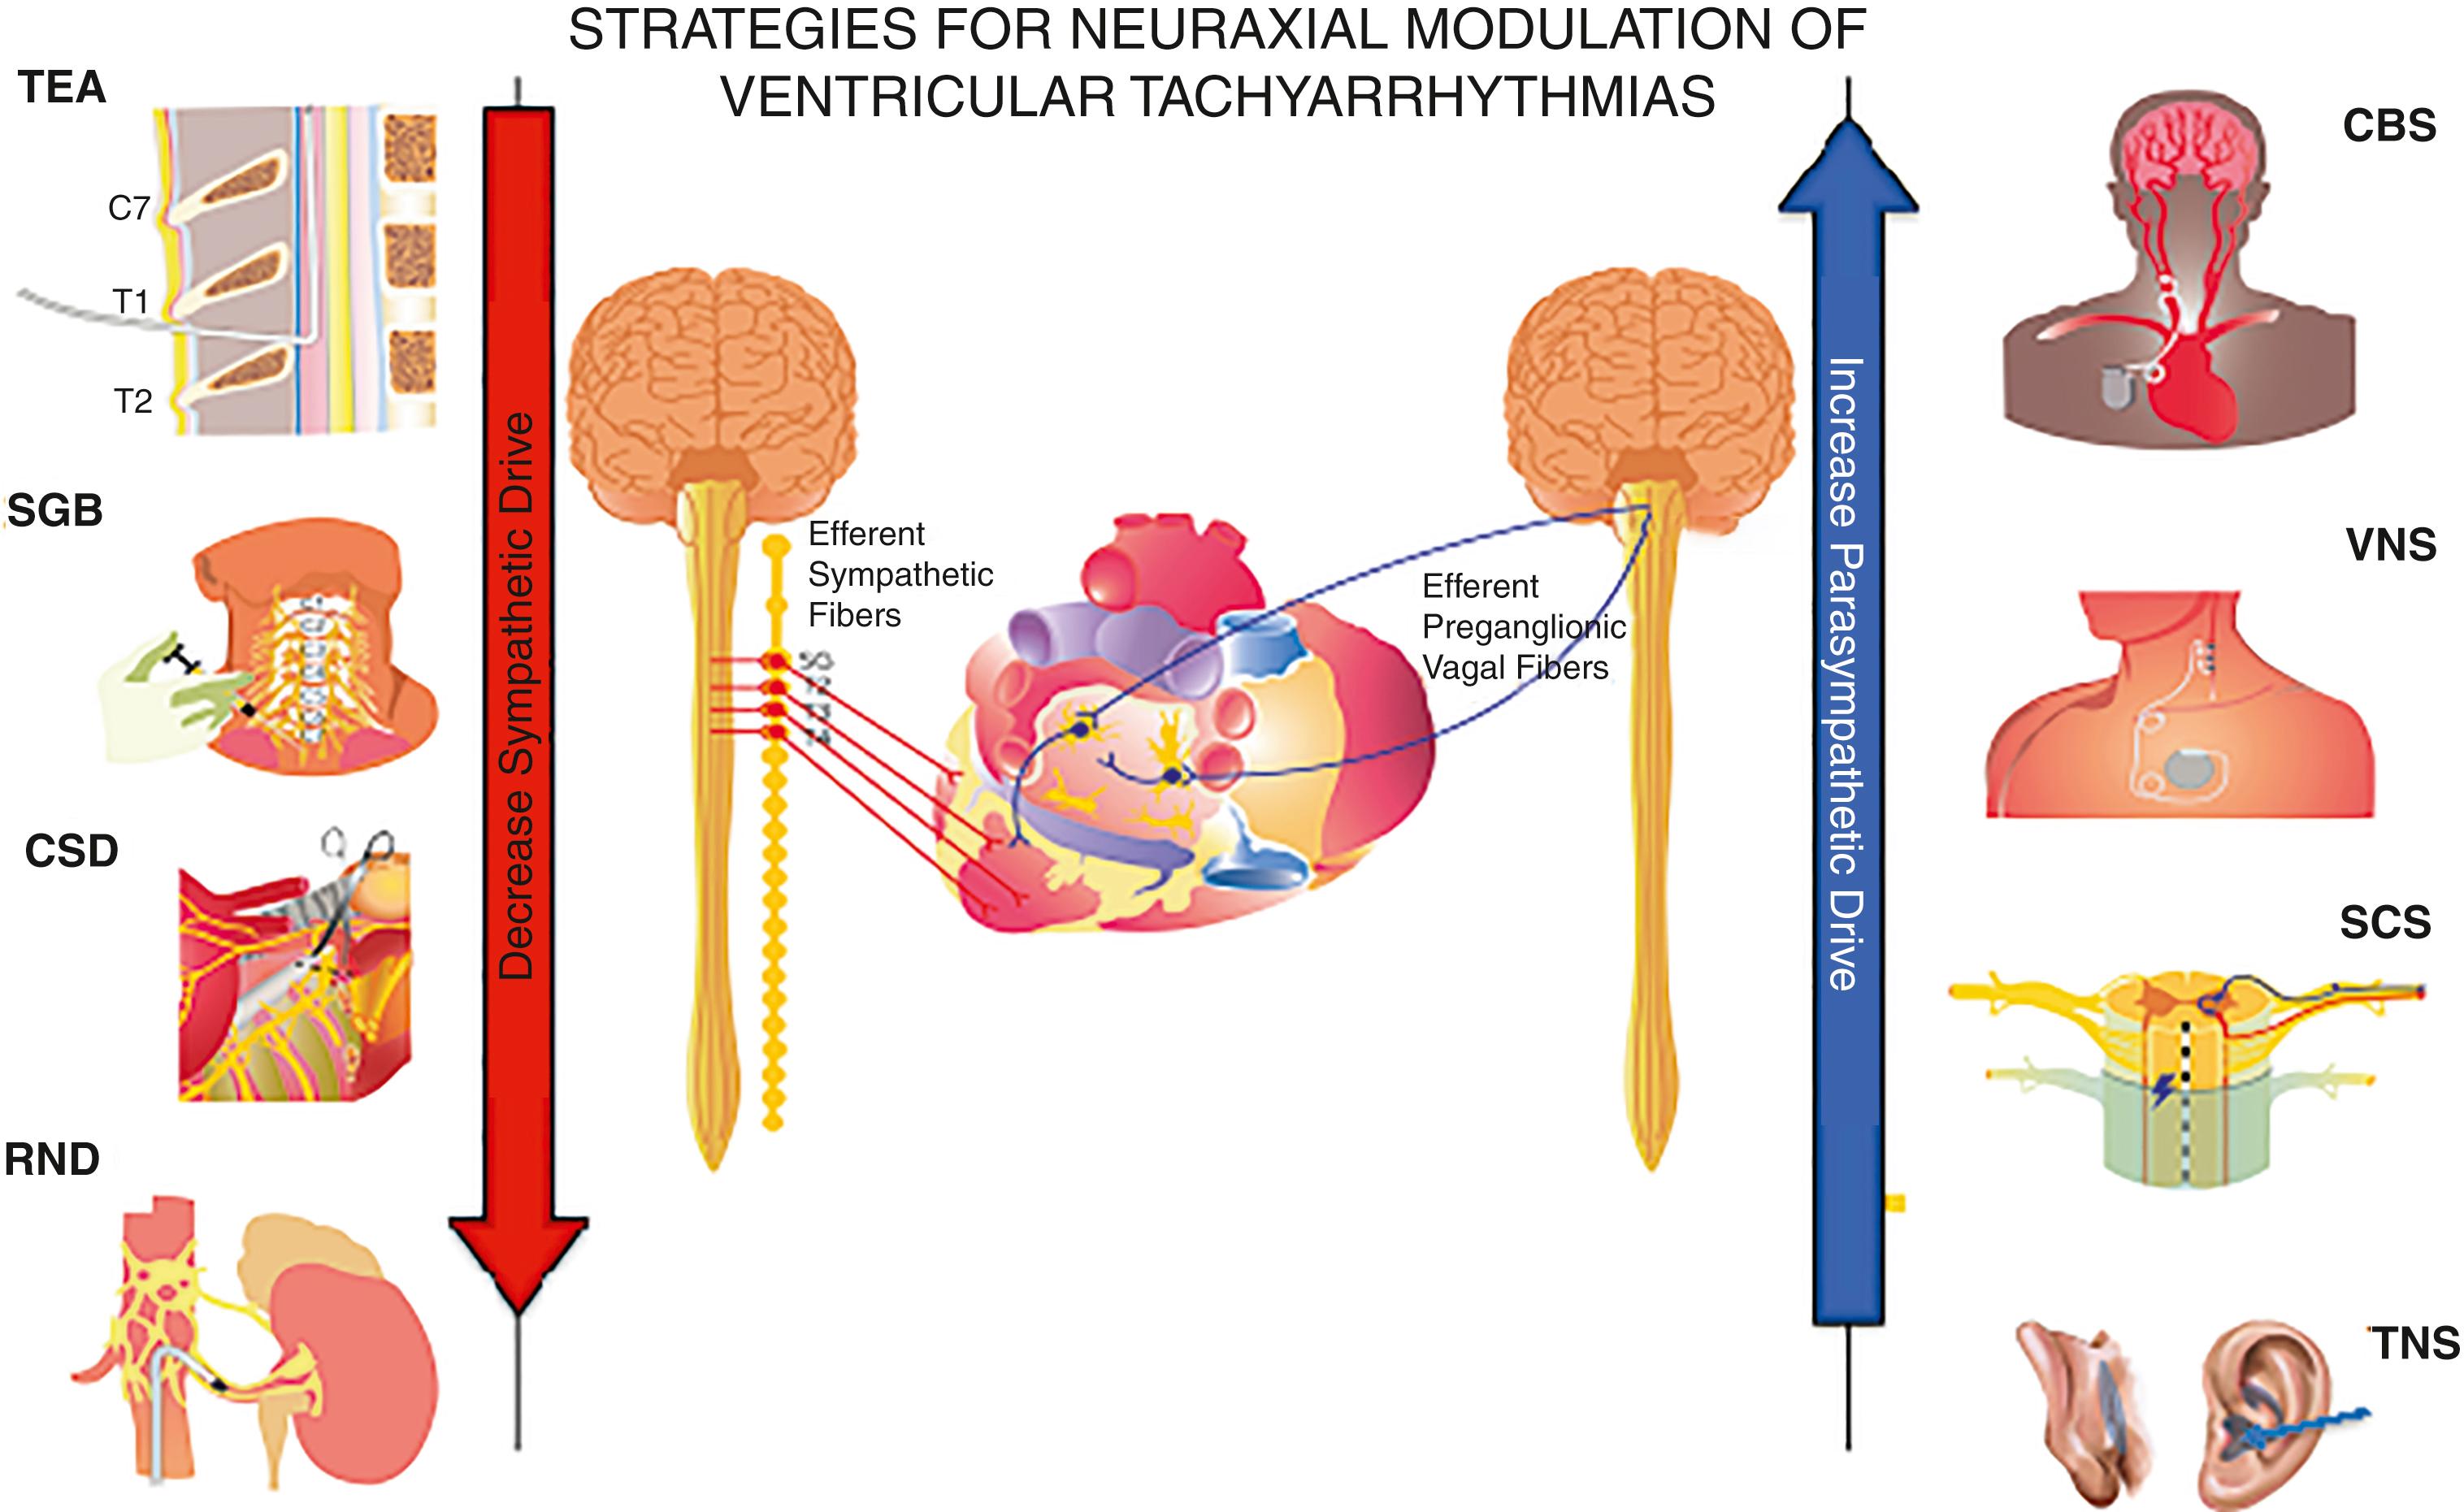 Fig. 137.3, Nonpharmacologic methods of neuraxial modulation of ventricular arrhythmias have relied on inhibiting the sympathetic nervous system and normalizing the decreased vagal outflow that accompanies structural heart disease and heart failure. CBS , Carotid baroreceptor stimulation; CSD, cardiac sympathetic denervation; RDN , renal denervation; SCS , spinal cord stimulation; SGB , stellate ganglion block; TEA , thoracic epidural anesthesia; TNS , tragus or transcutaneous vagal nerve stimulation; VNS , vagal nerve stimulation.